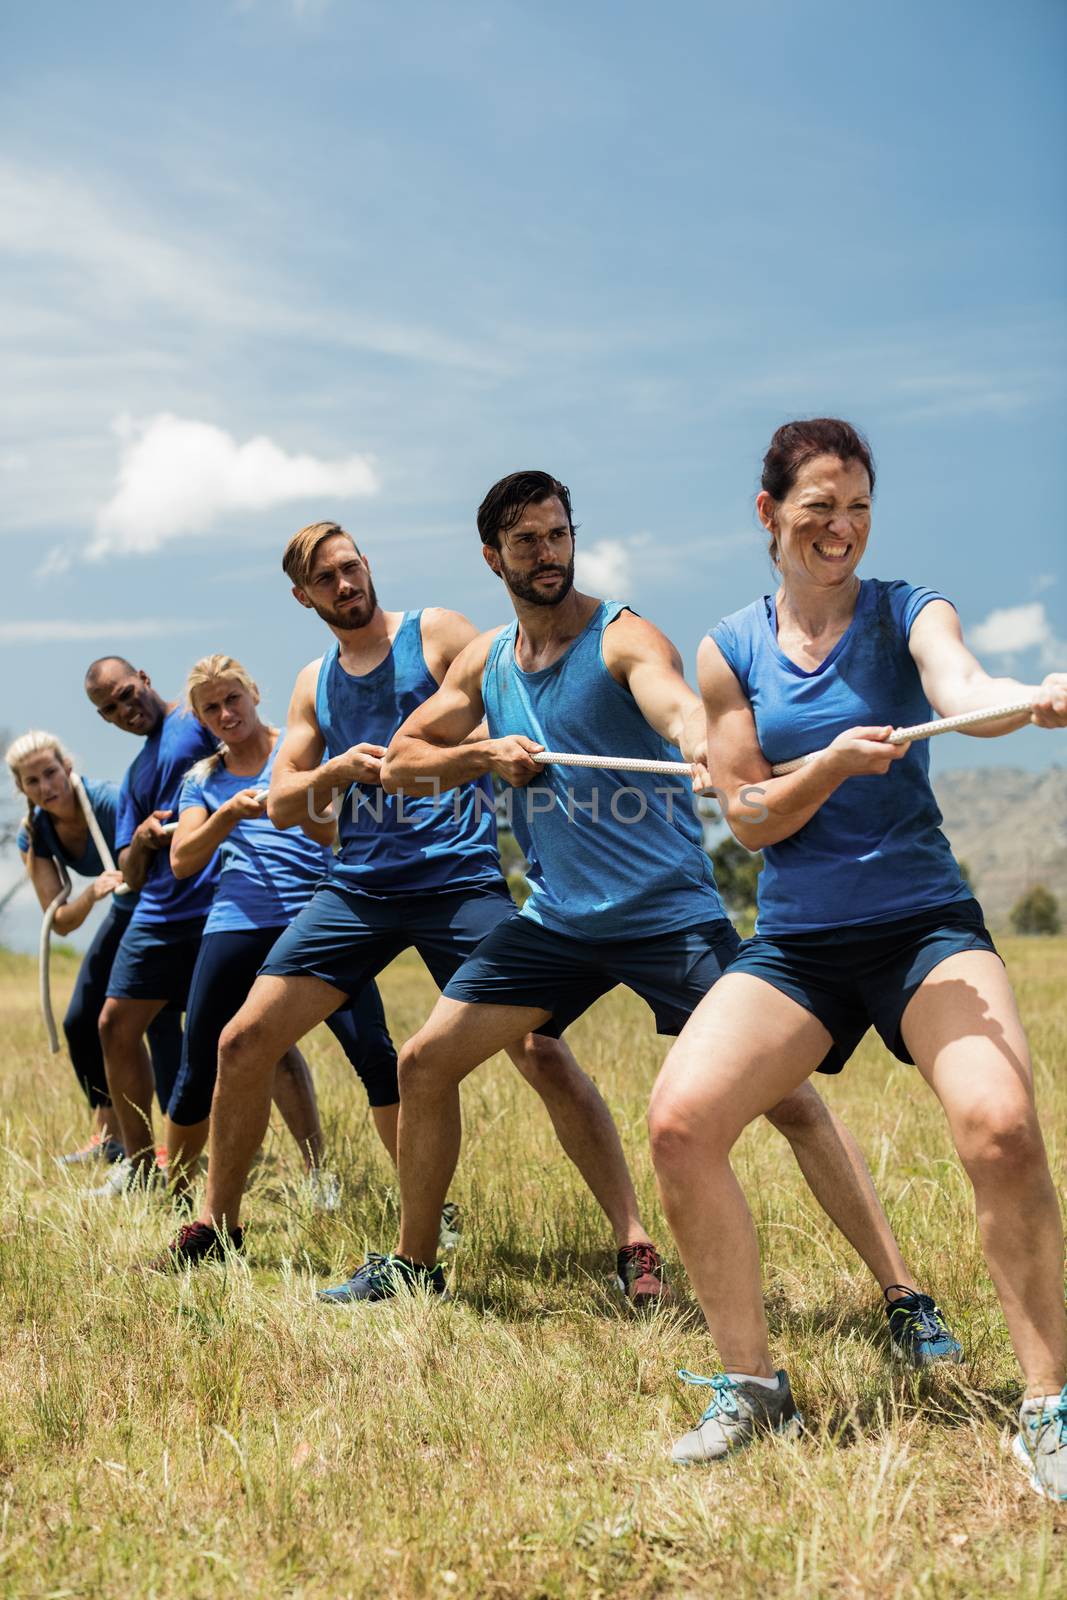 People playing tug of war during obstacle training course by Wavebreakmedia